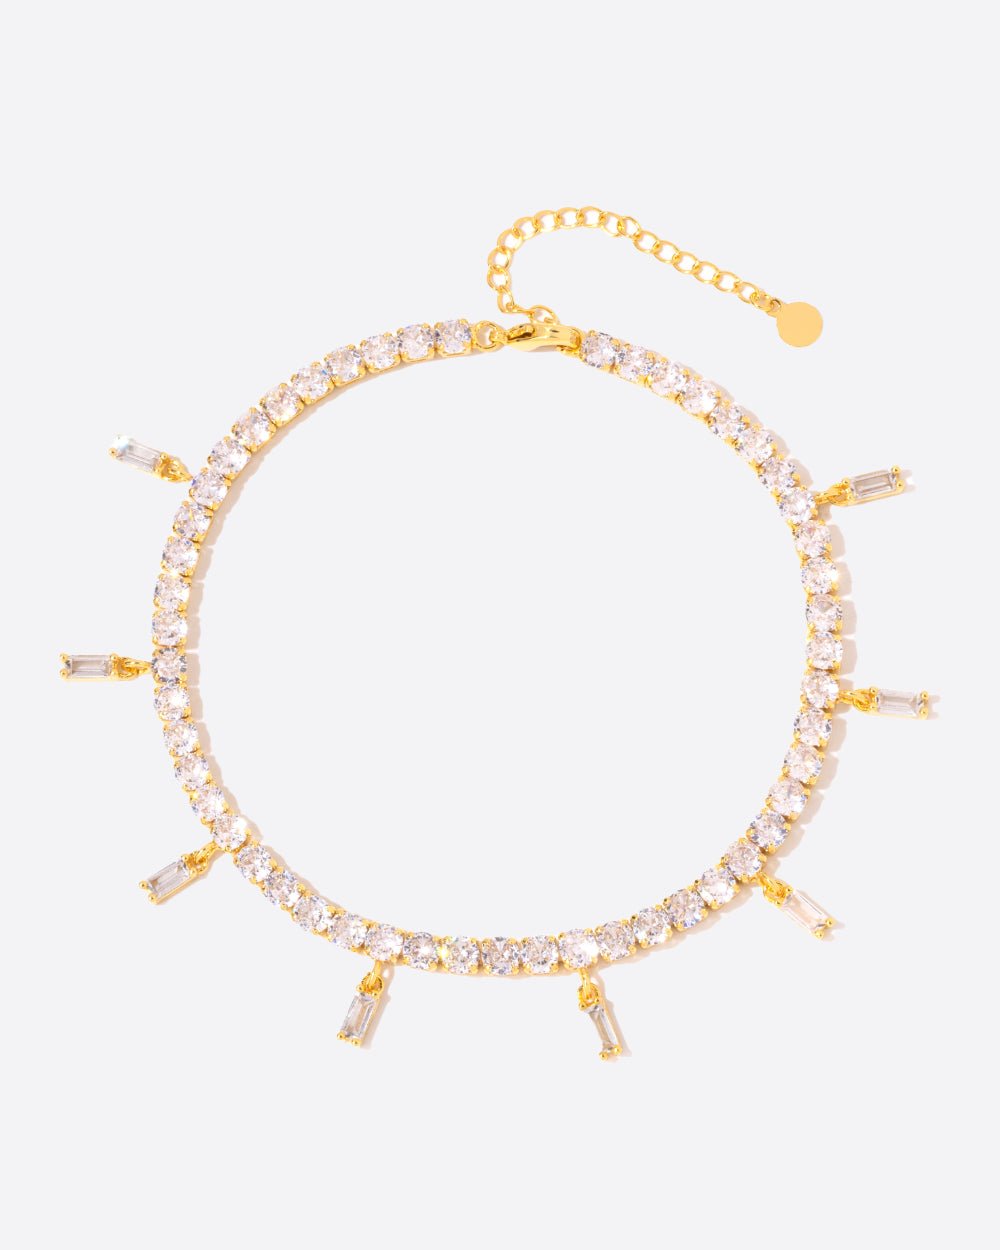 ICED BAGUETTE TENNIS ANKLET. - 4MM 18K GOLD - Drippy Amsterdam